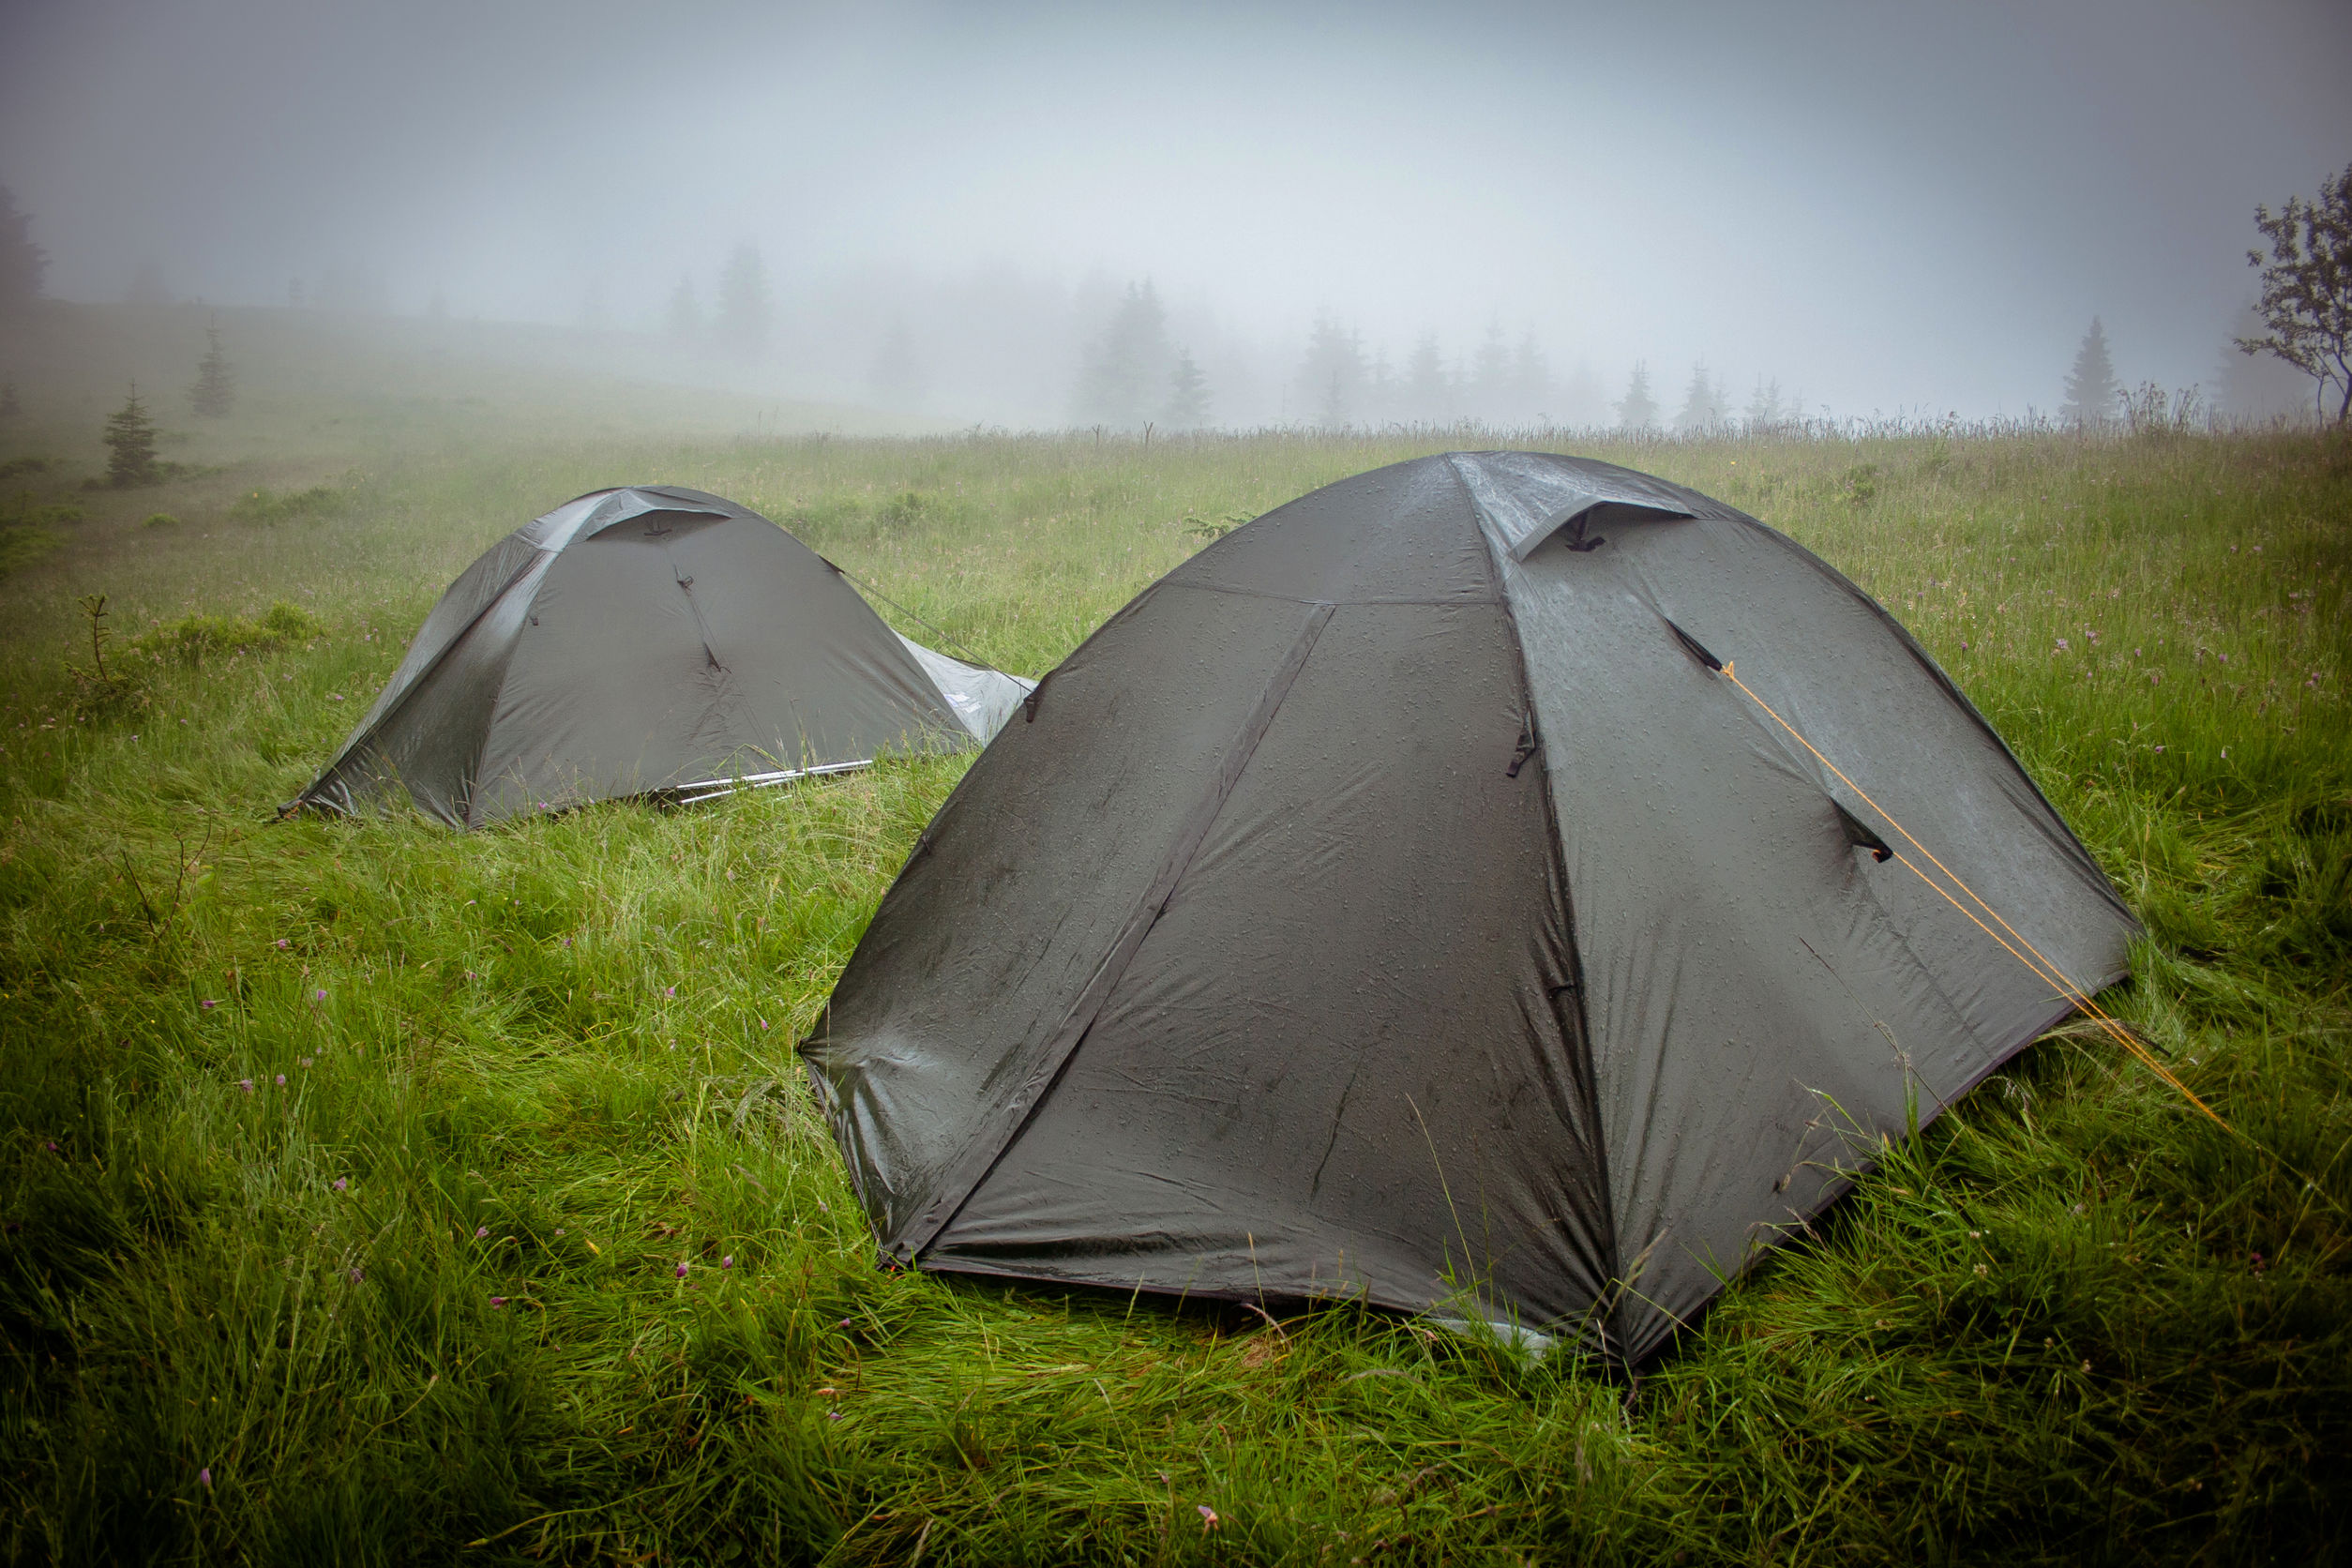 Camping tent within a heavy rain shower and mist